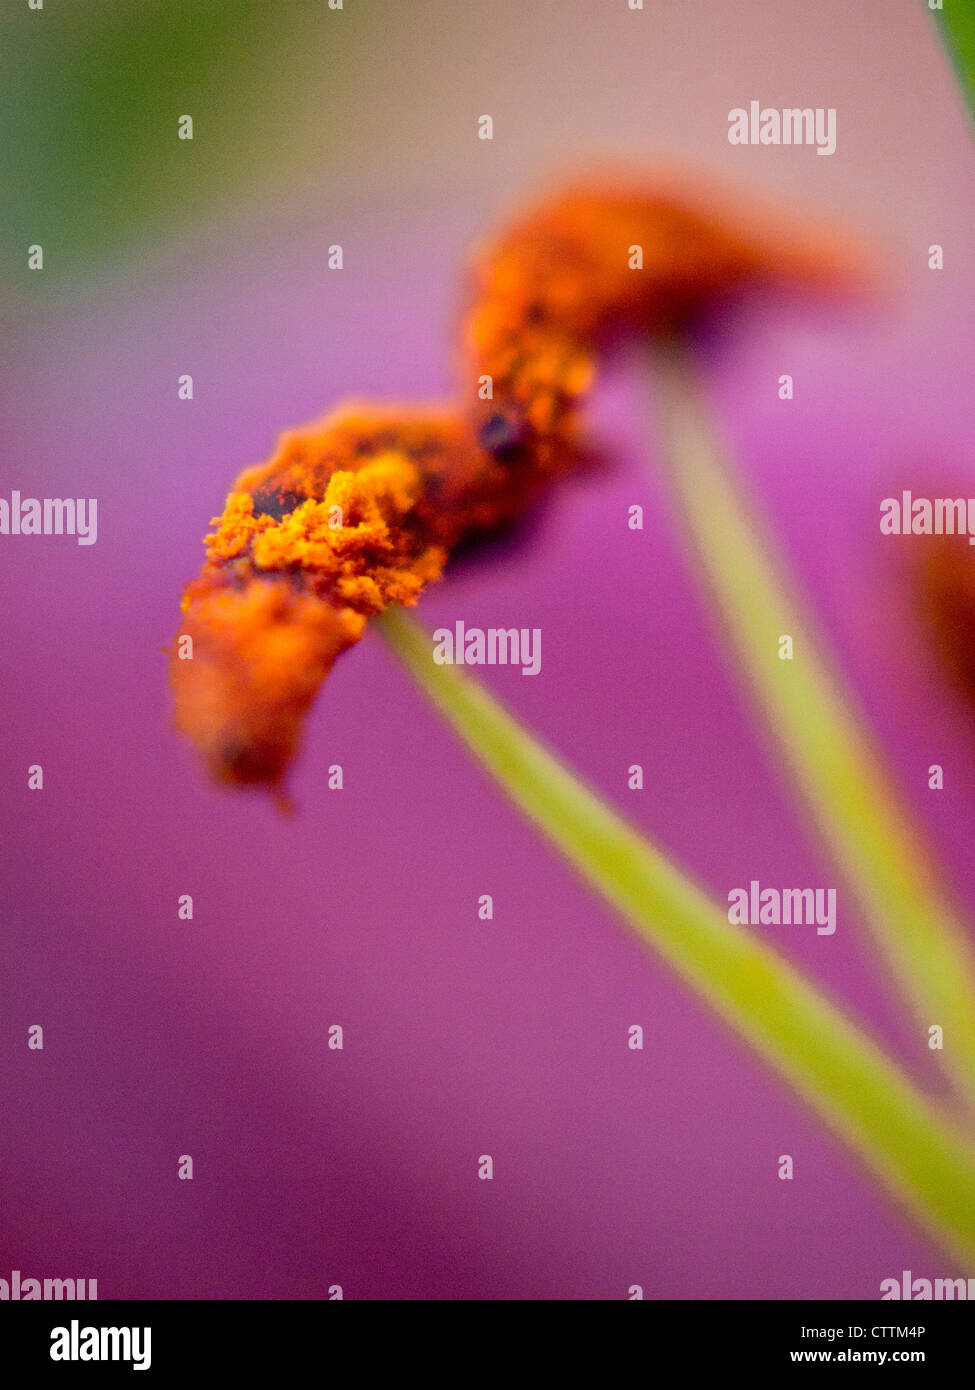 Lily stamens up close Stock Photo